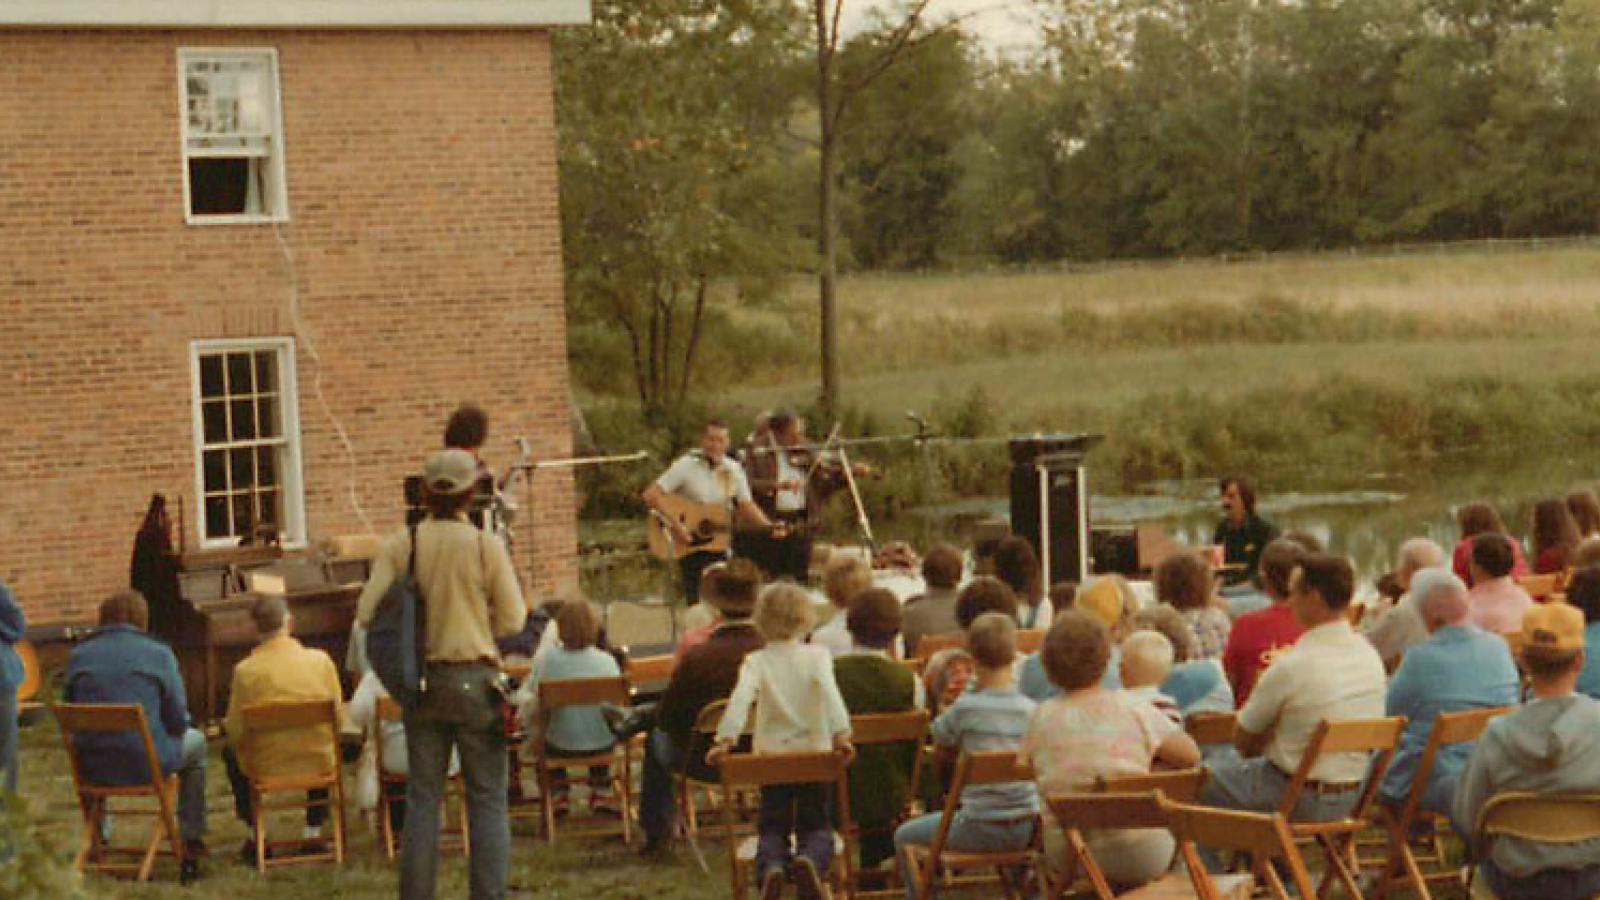 Performers at the Western Ohio Folklife Festival in 1979